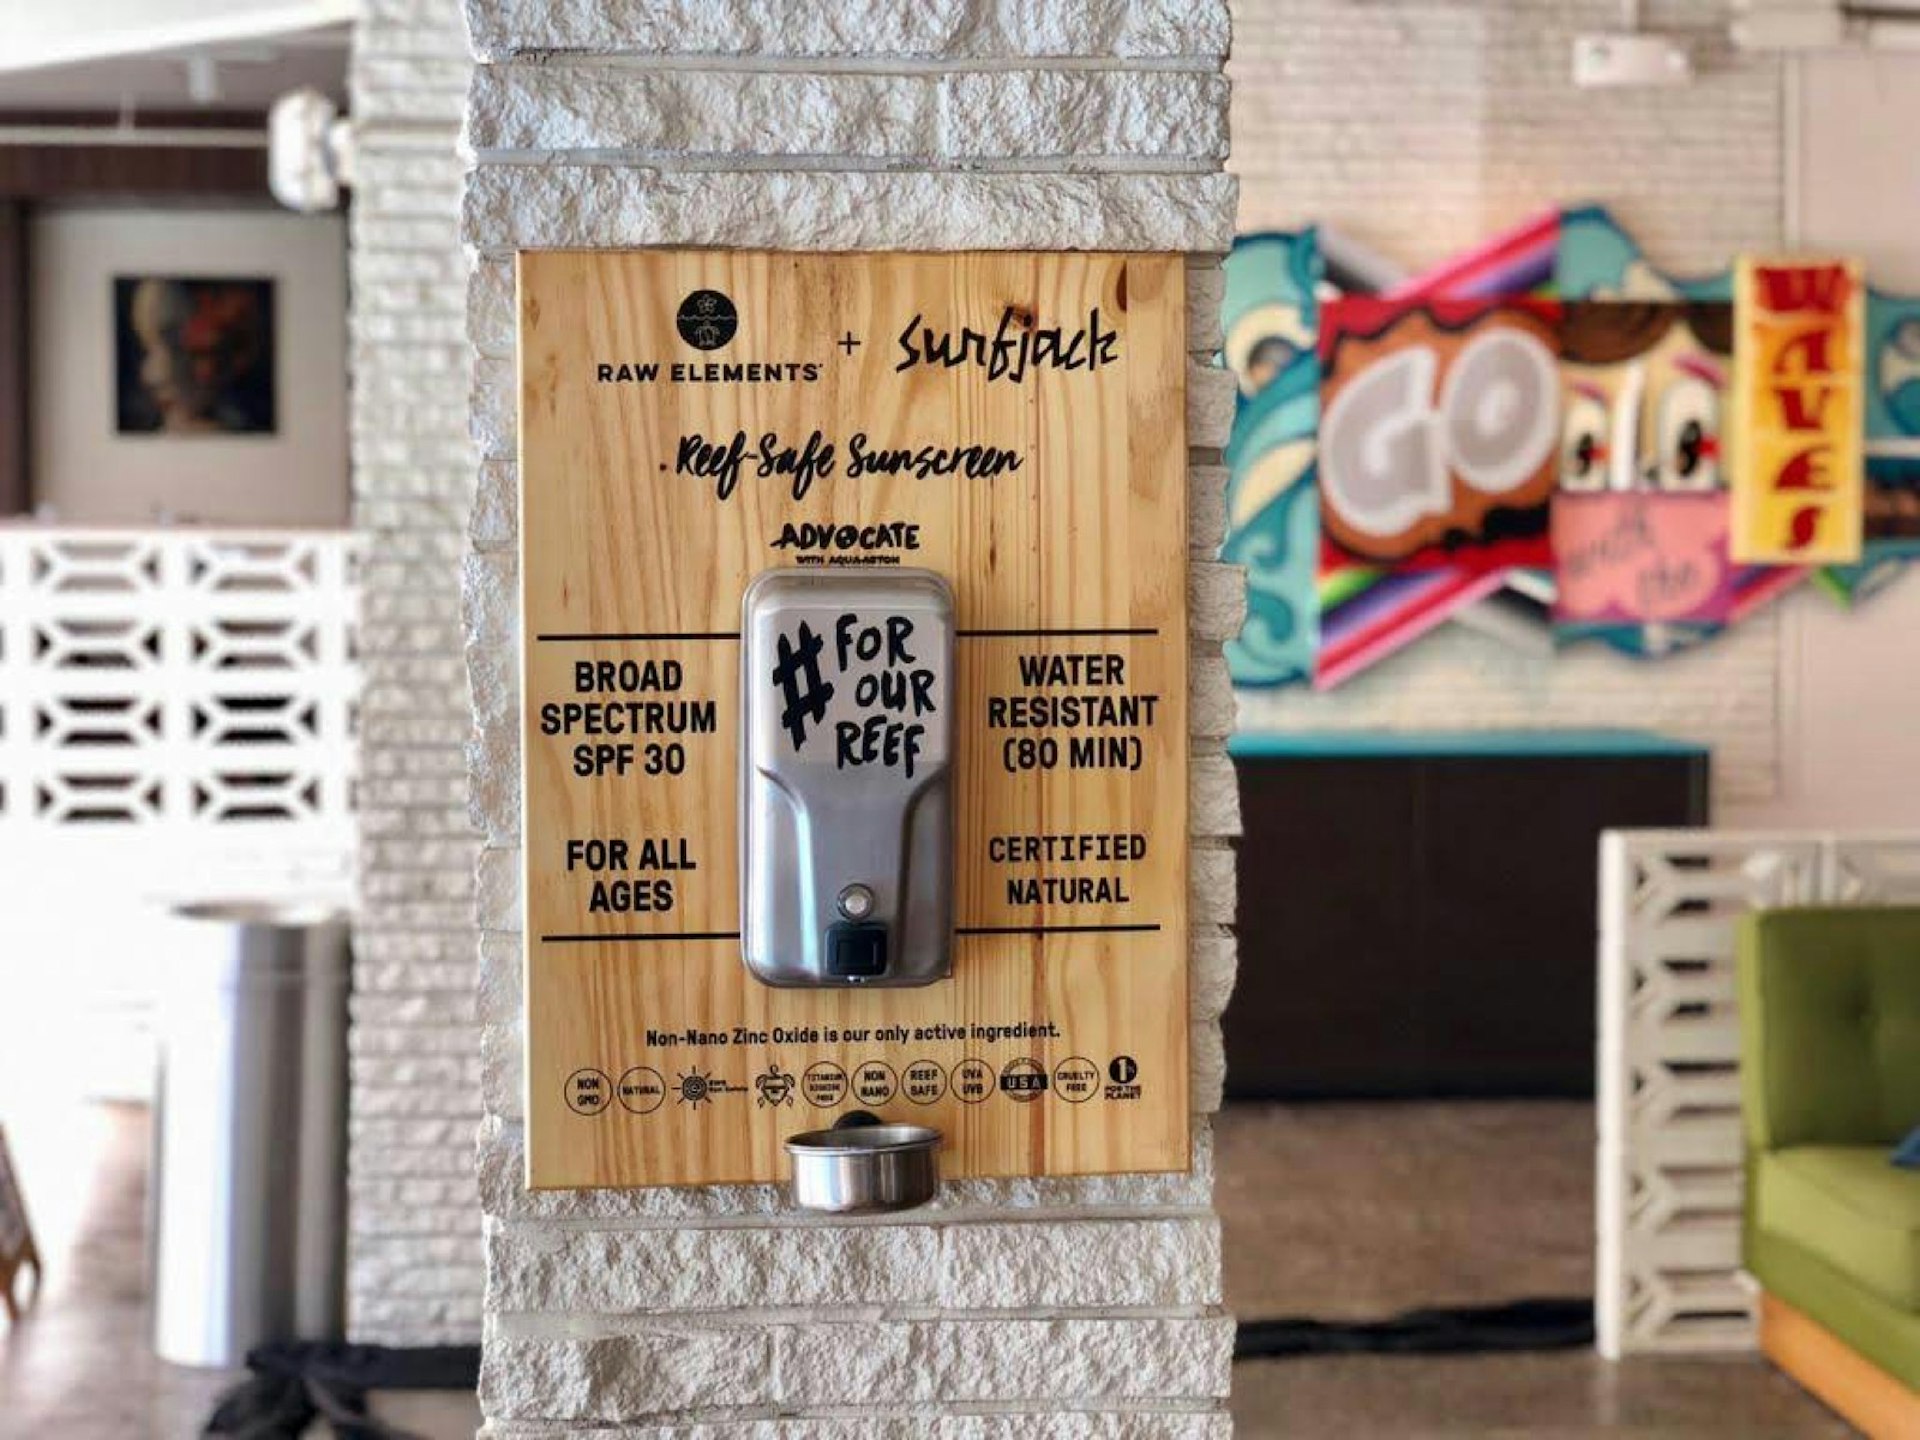 A wooden sign and dispenser offers free reef-safe sunscreen on the wall of a hotel in Hawaii